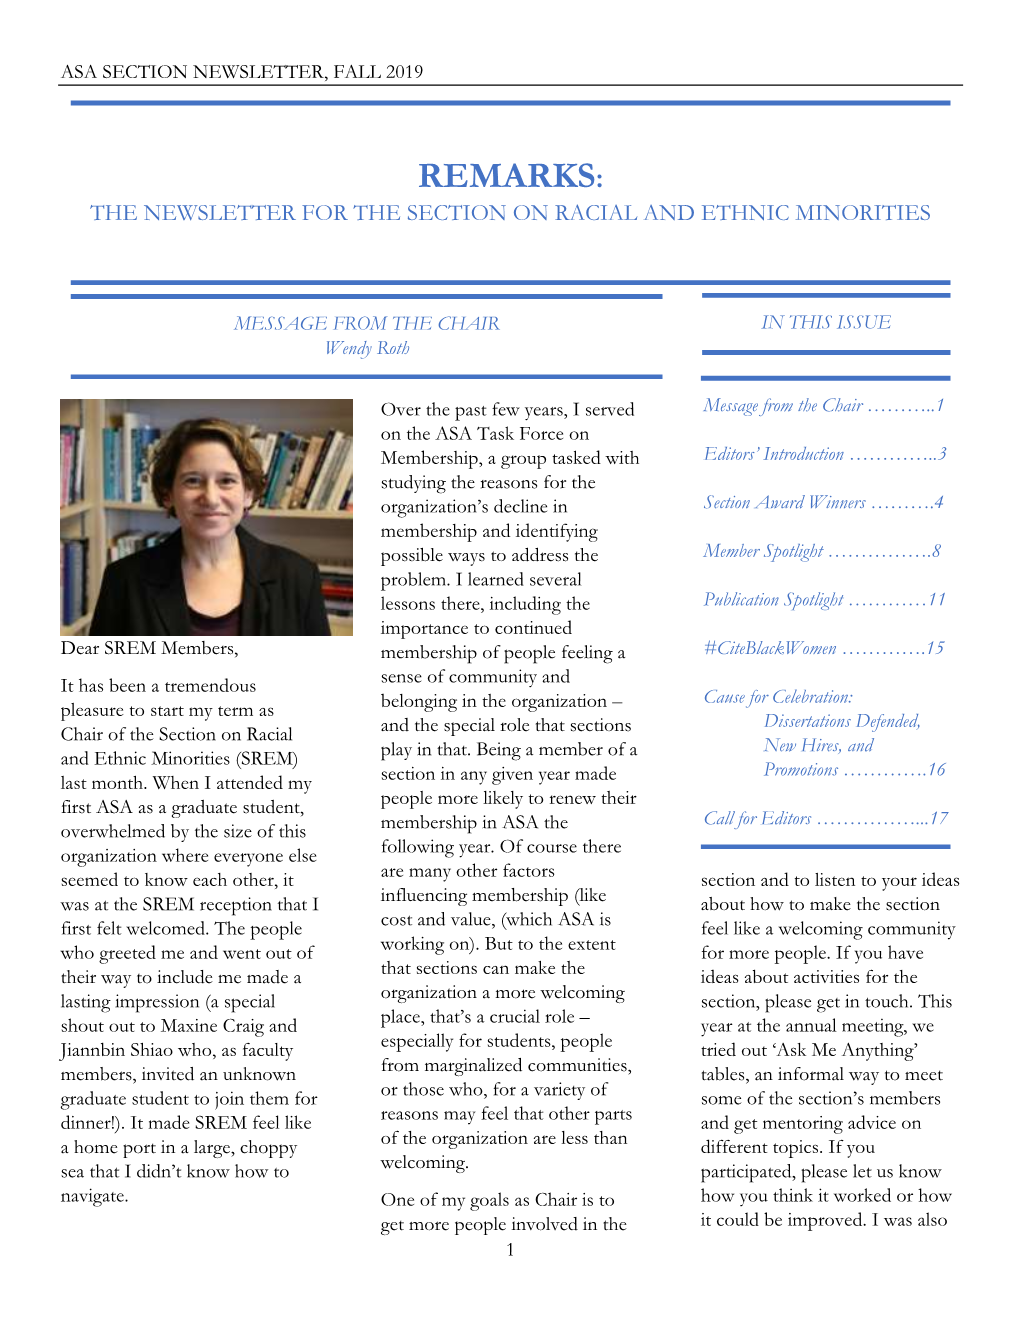 Remarks: the Newsletter for the Section on Racial and Ethnic Minorities